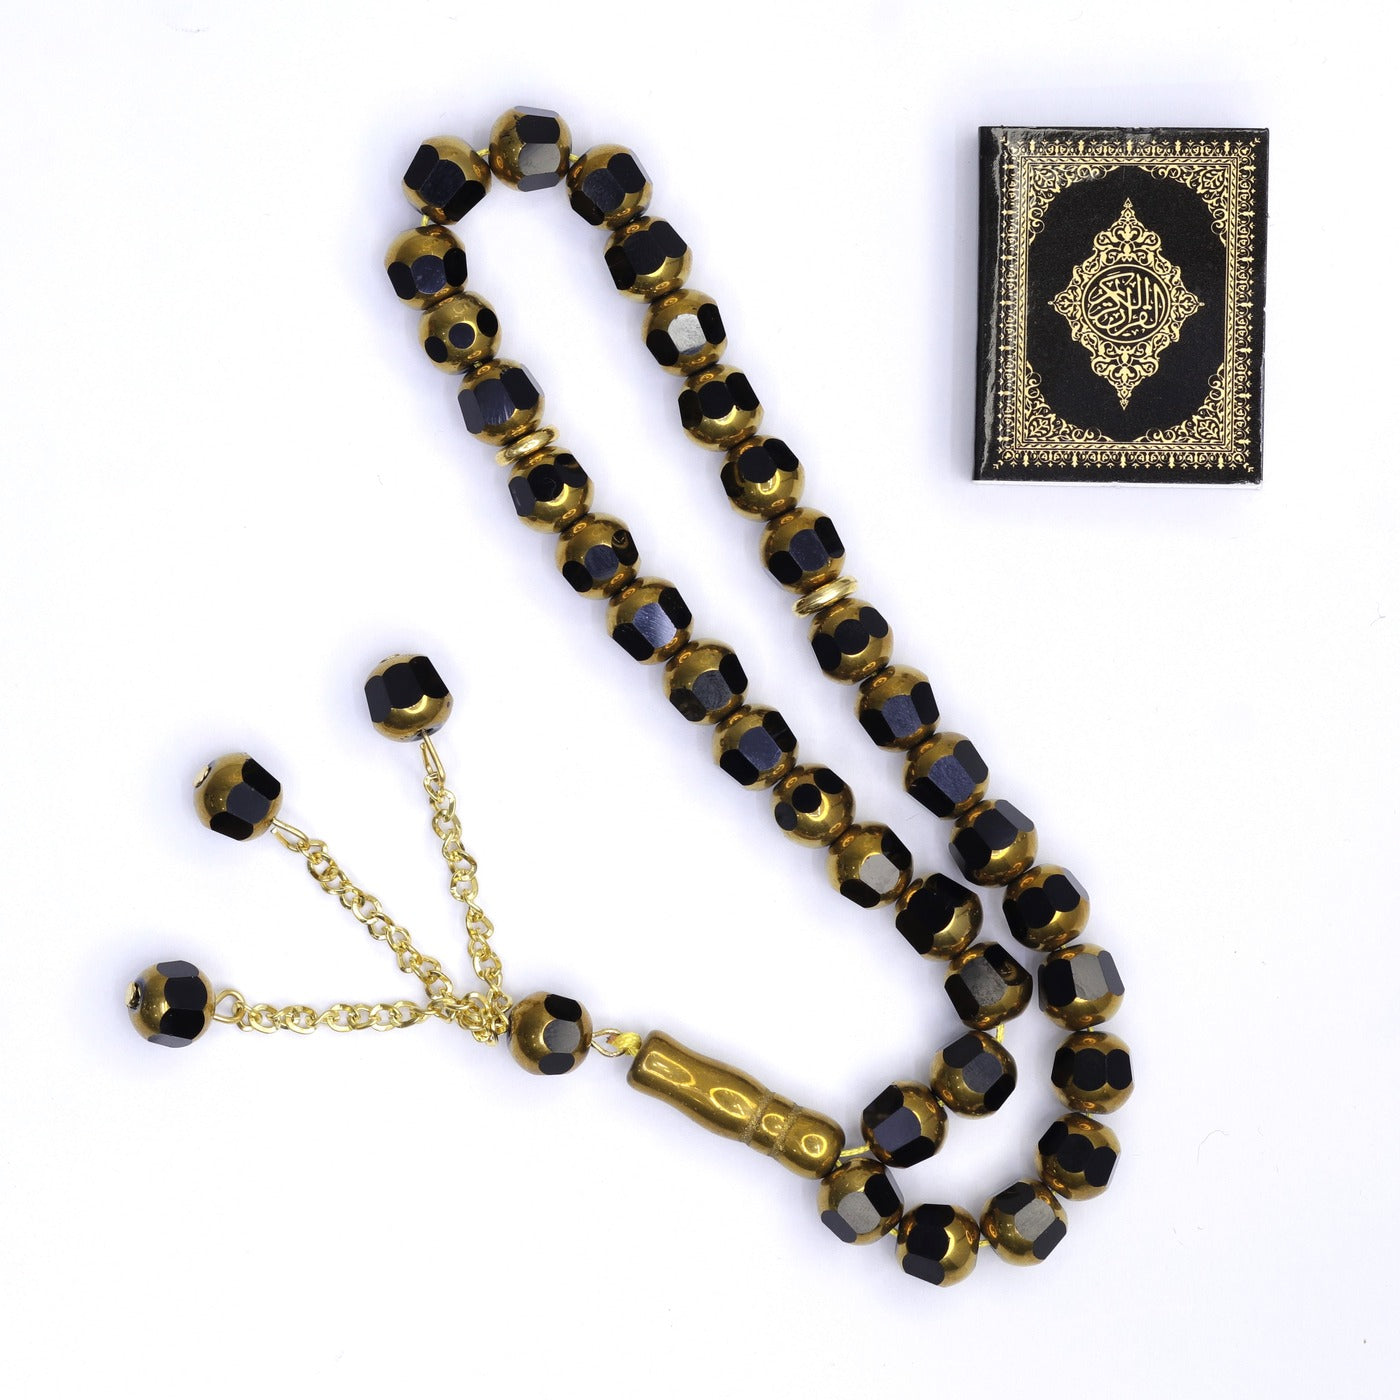 Small and Shiny Black With Gold Prayer Tasbeeh 33 Beads